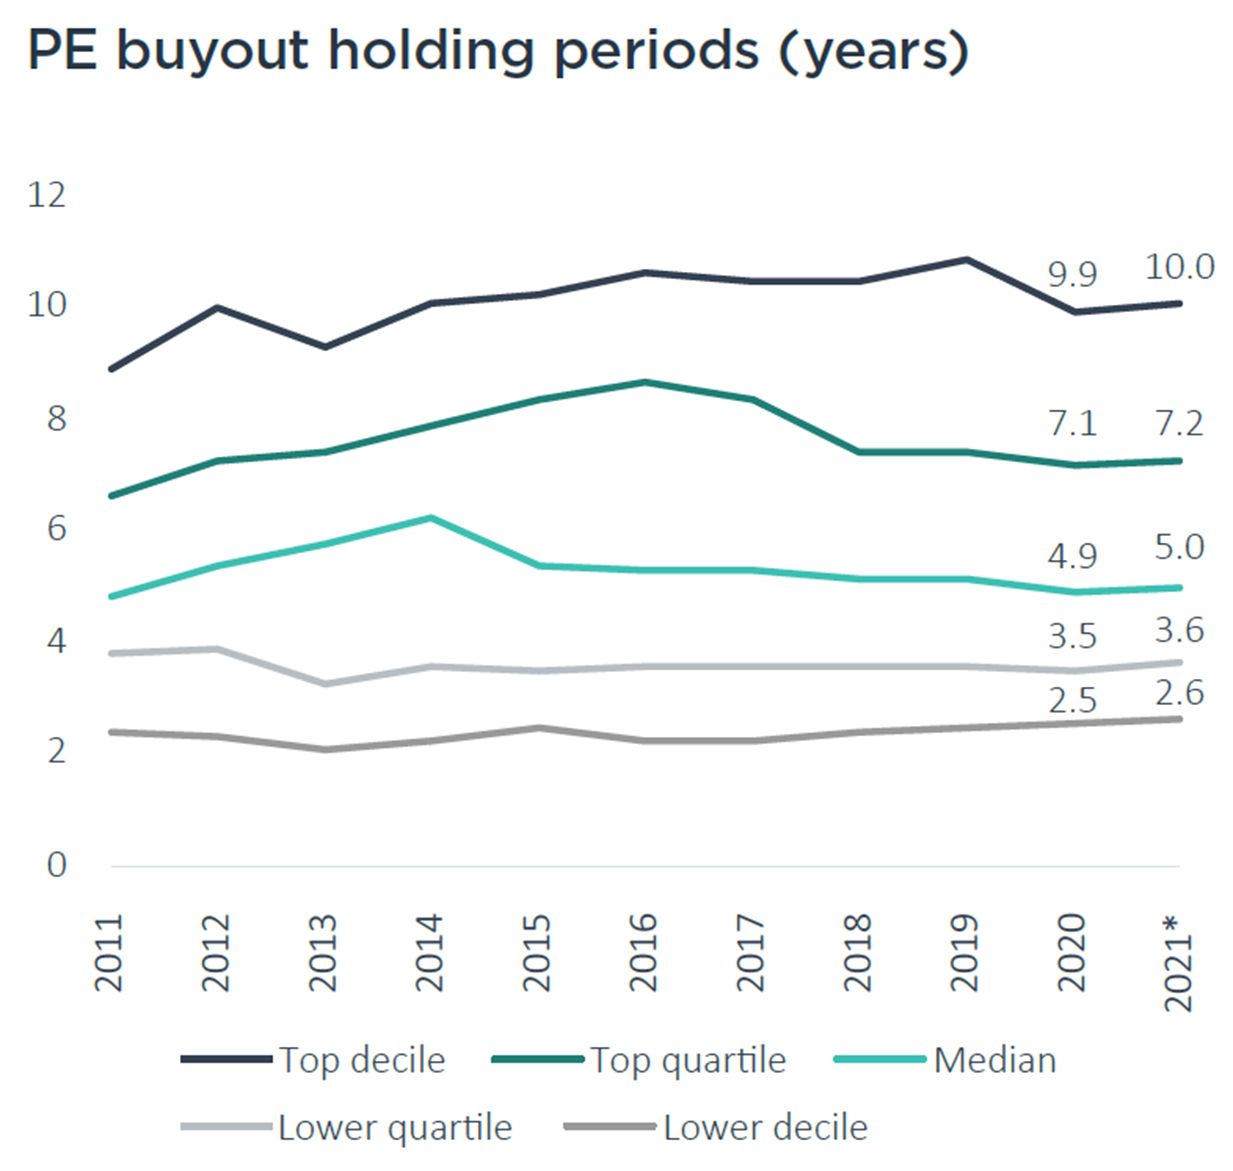 PE buyout holding periods (year)